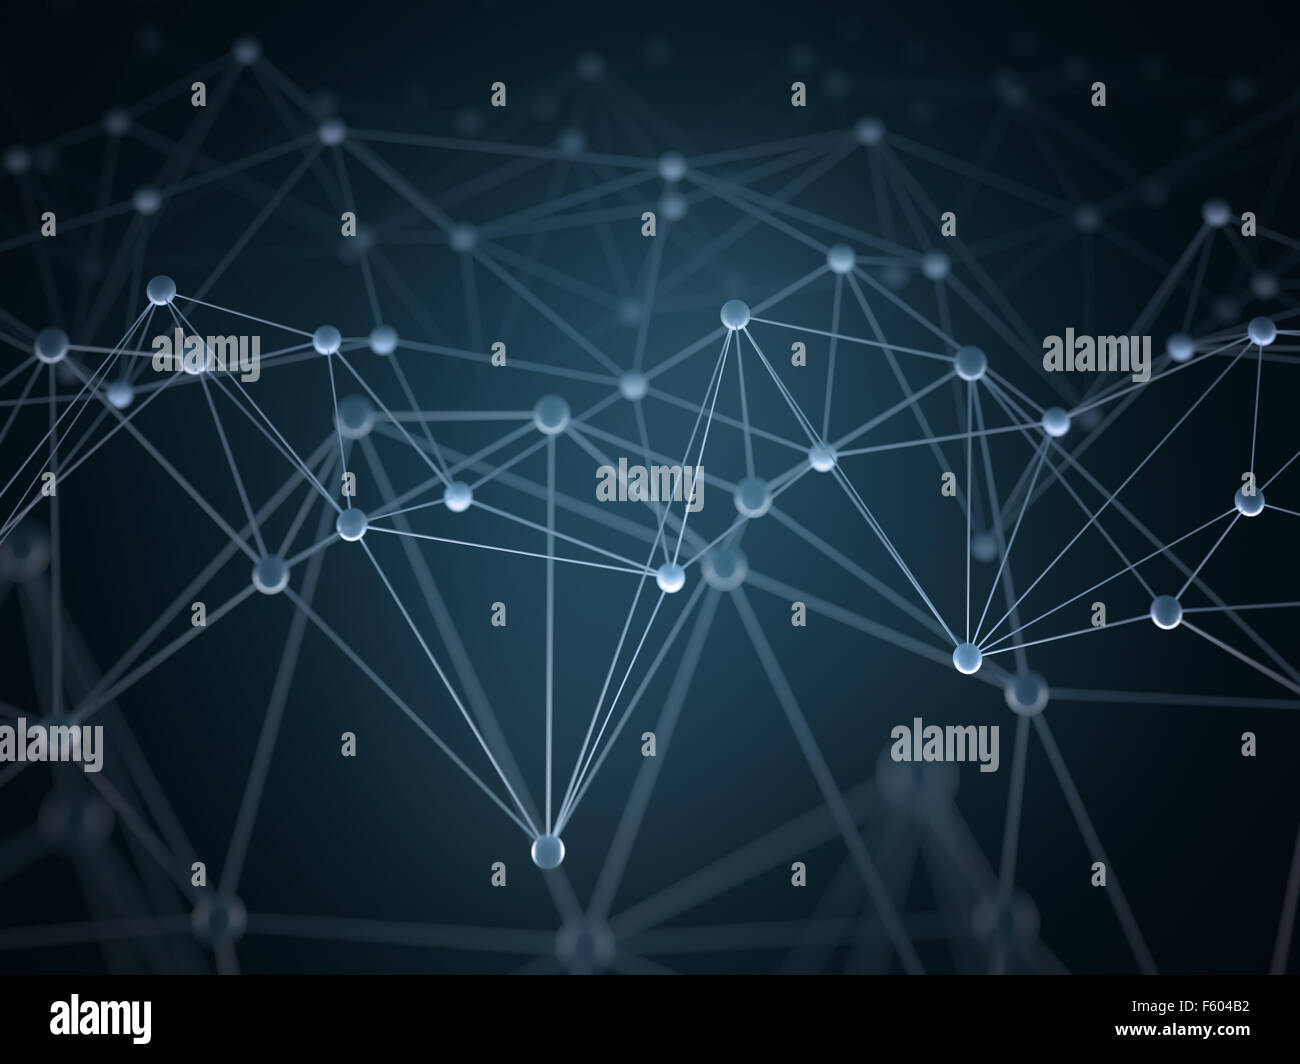 Abstract background with points and interlinked connections in a network concept. Stock Photo